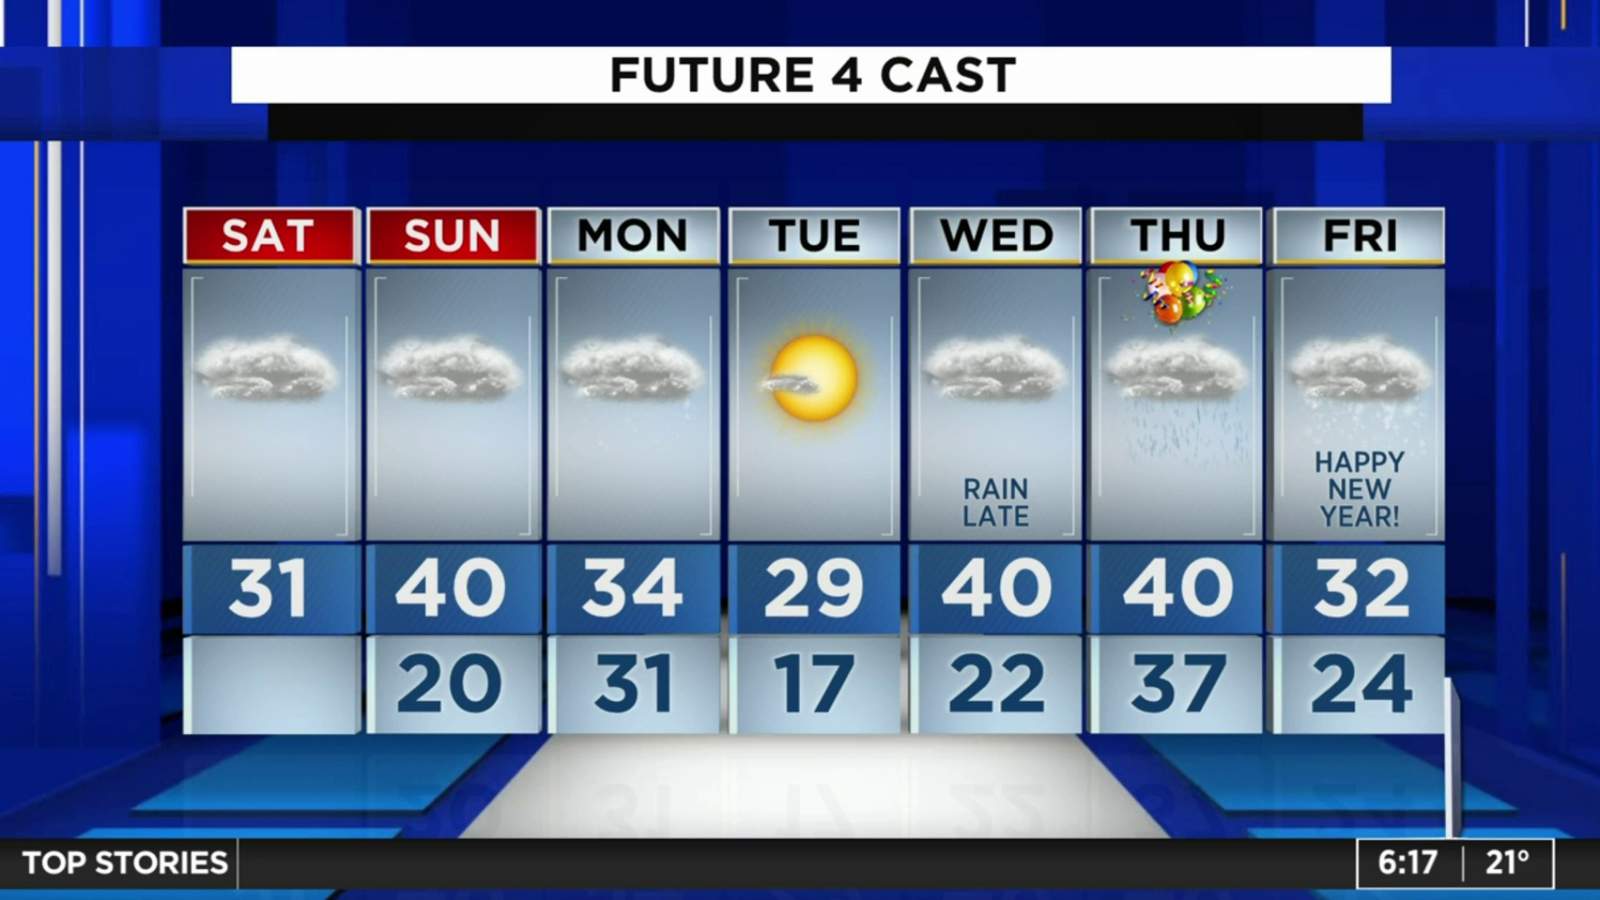 Metro Detroit weather: Mostly cloudy Saturday with some flurries possible